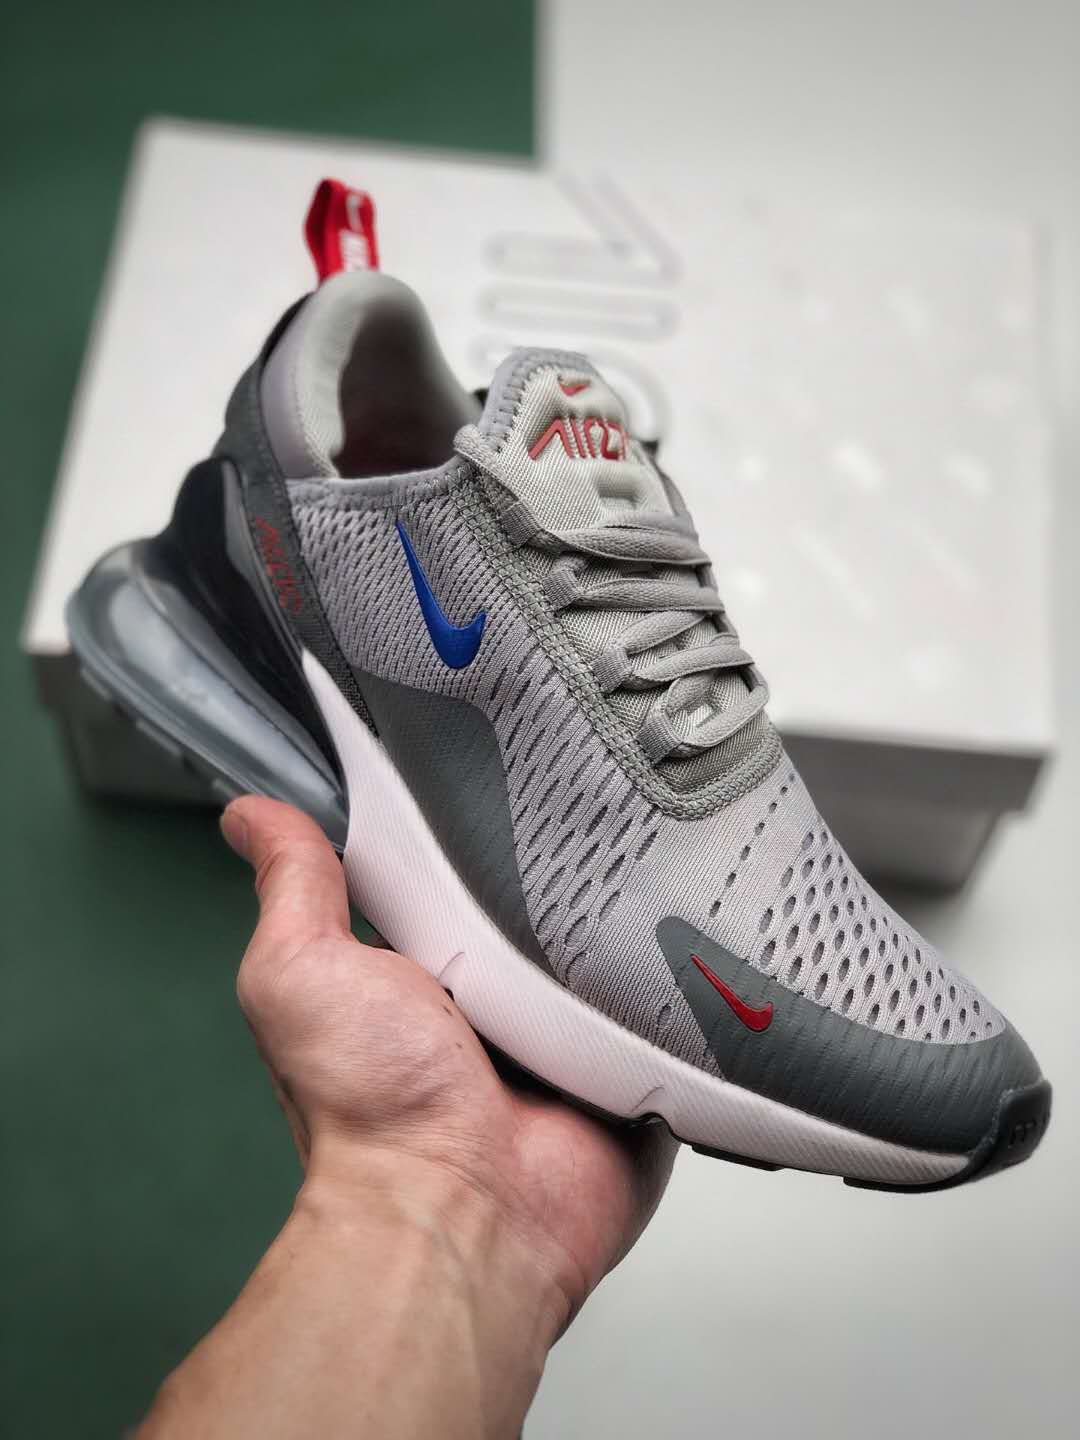 Nike Air Max 270 Grey Royal Red CD7338-001 - Enhance Your Style with Iconic Footwear